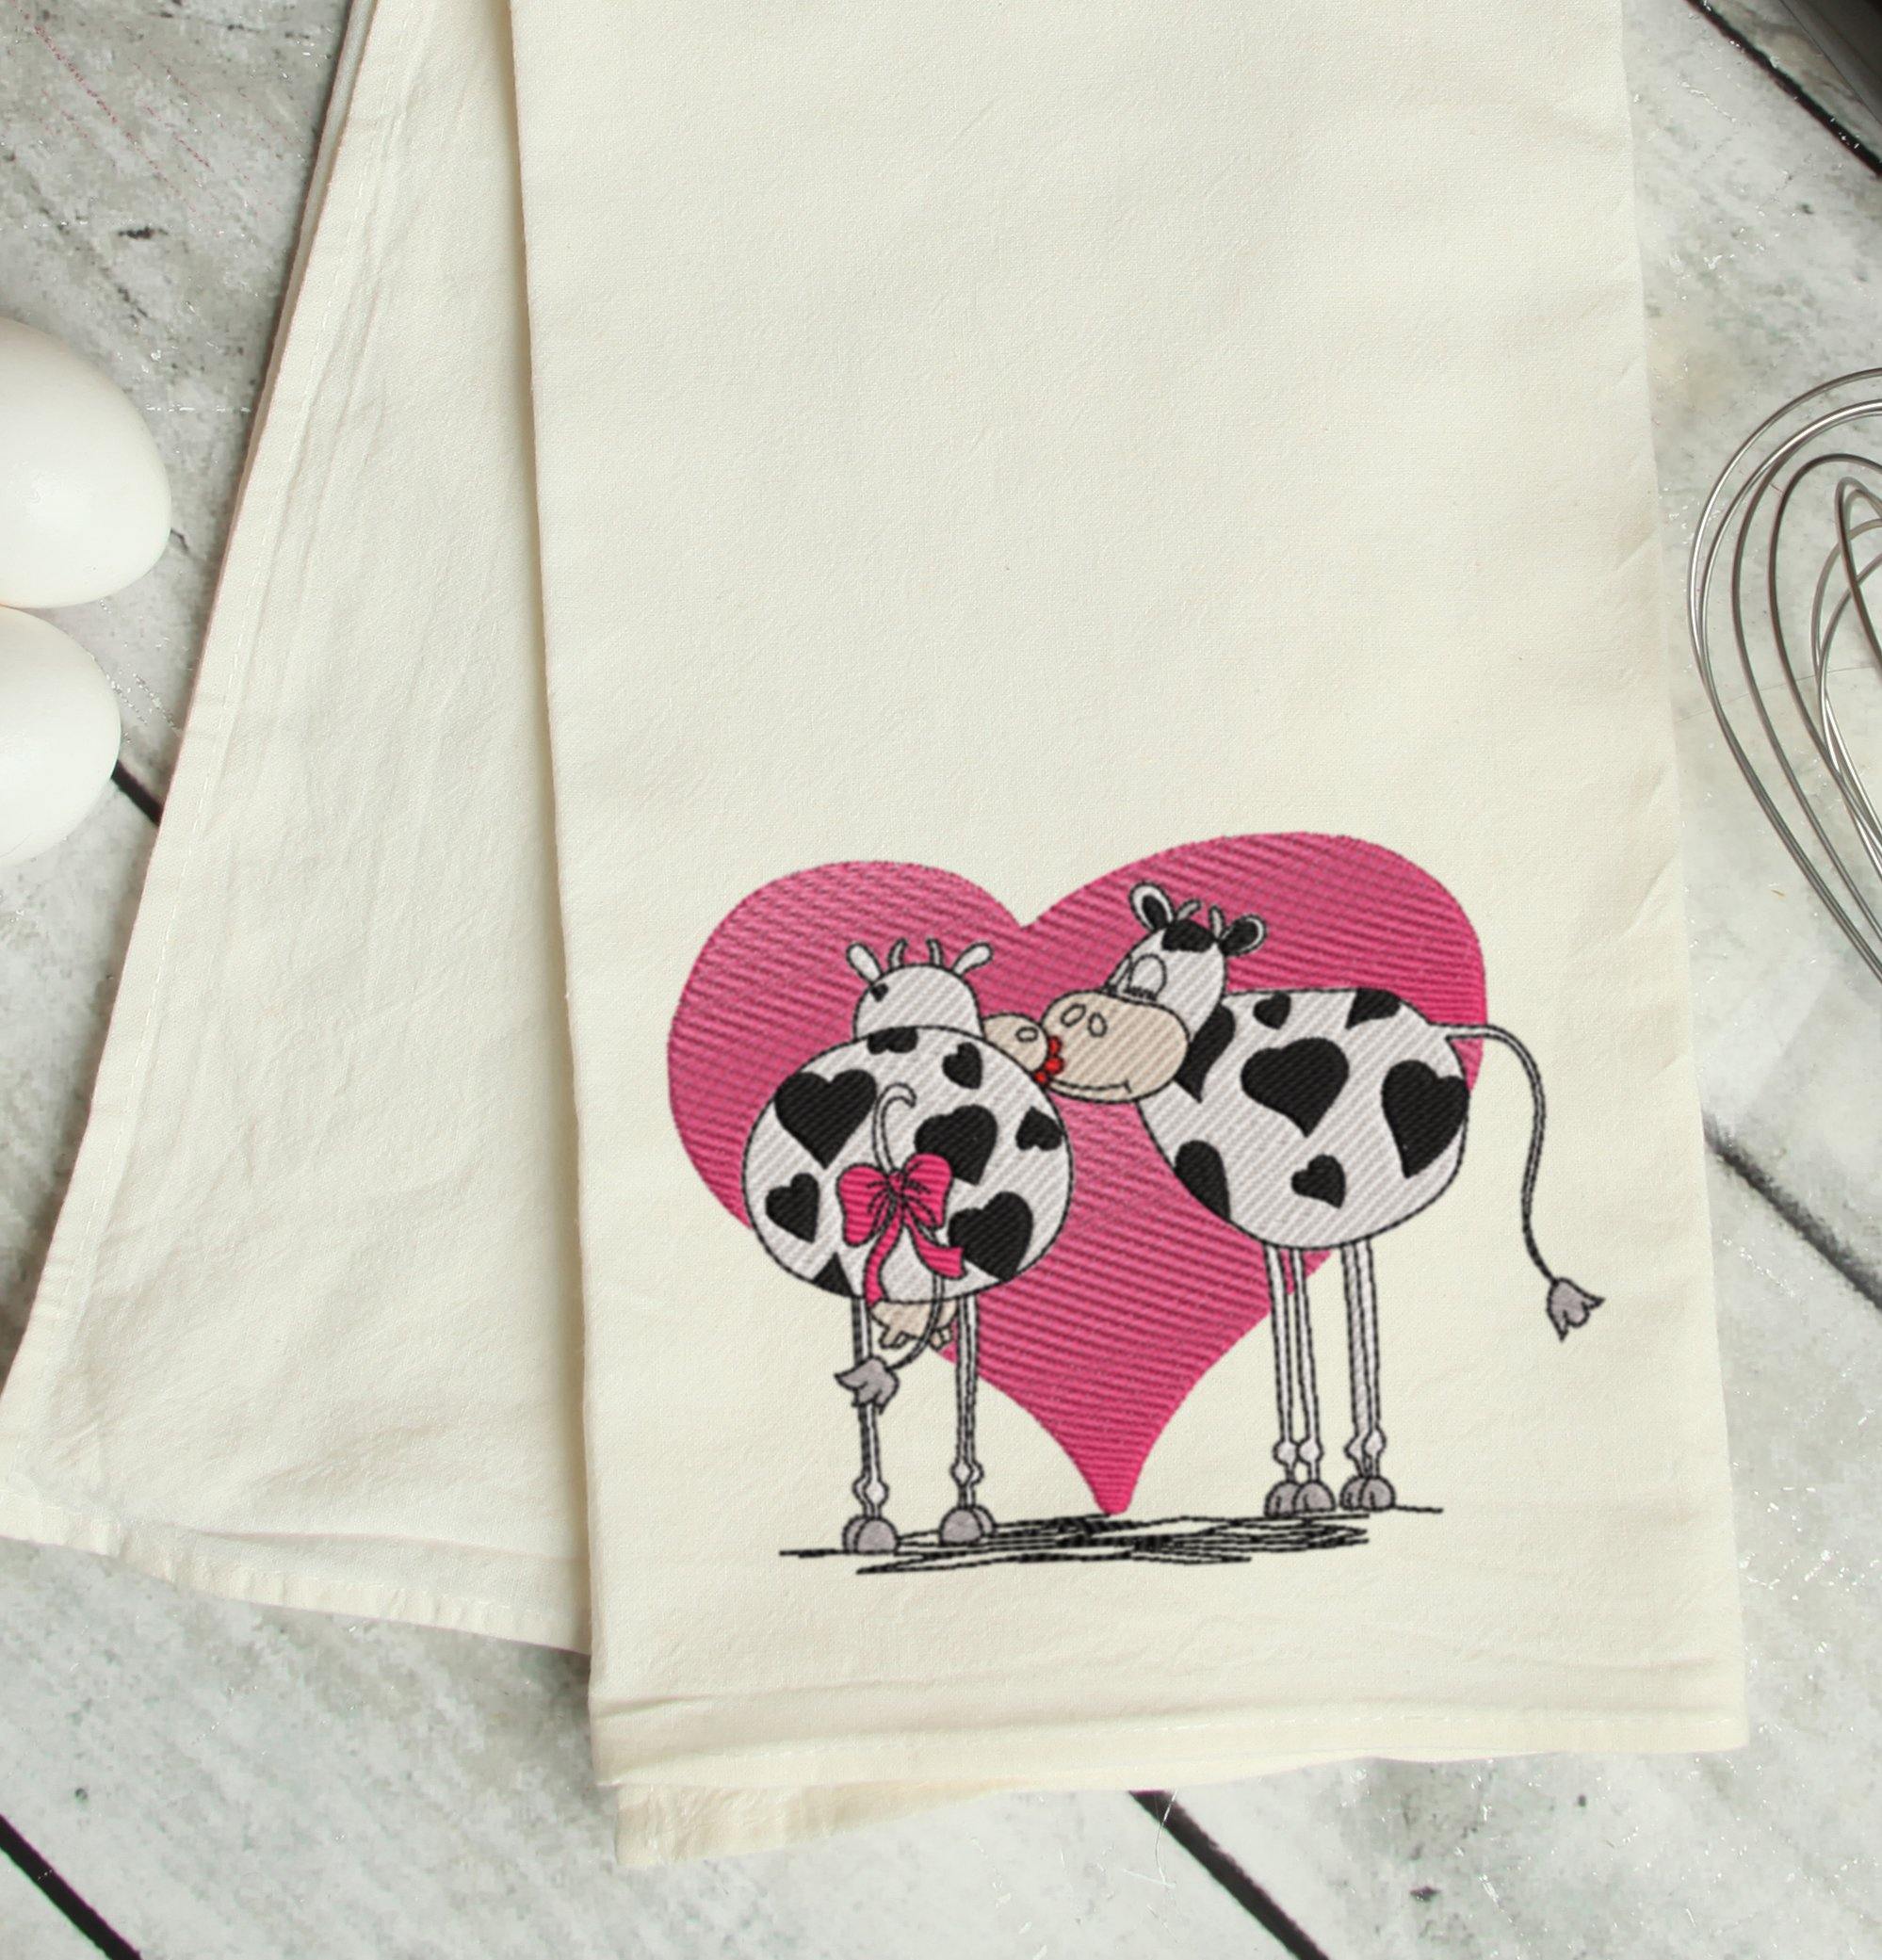 Moo-Love Embroidery Design - Oh My Crafty Supplies Inc.